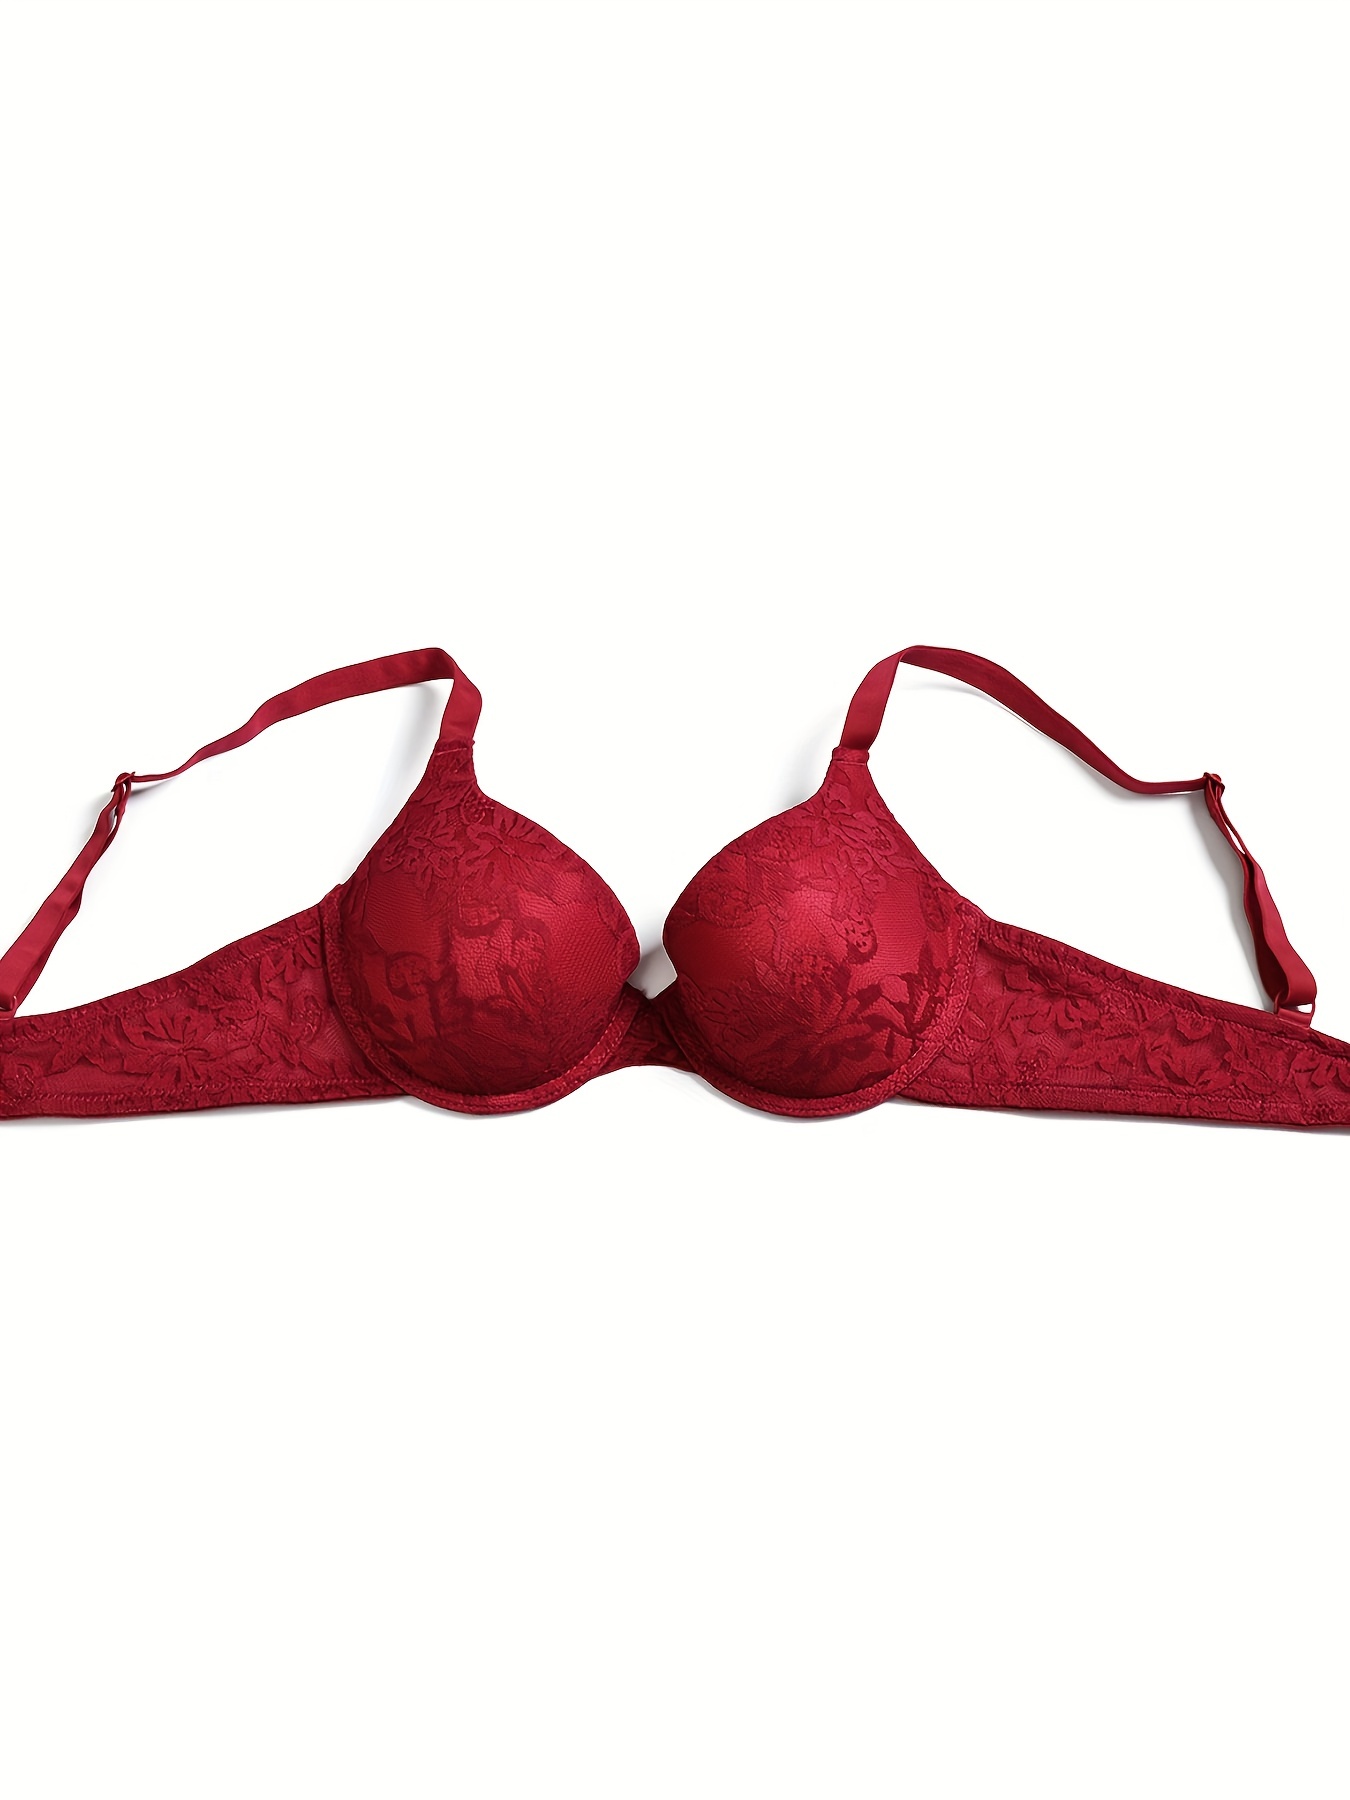 YANDW Red Mesh Lace Bralette Bras For Women Sexy Lingerie Big Size